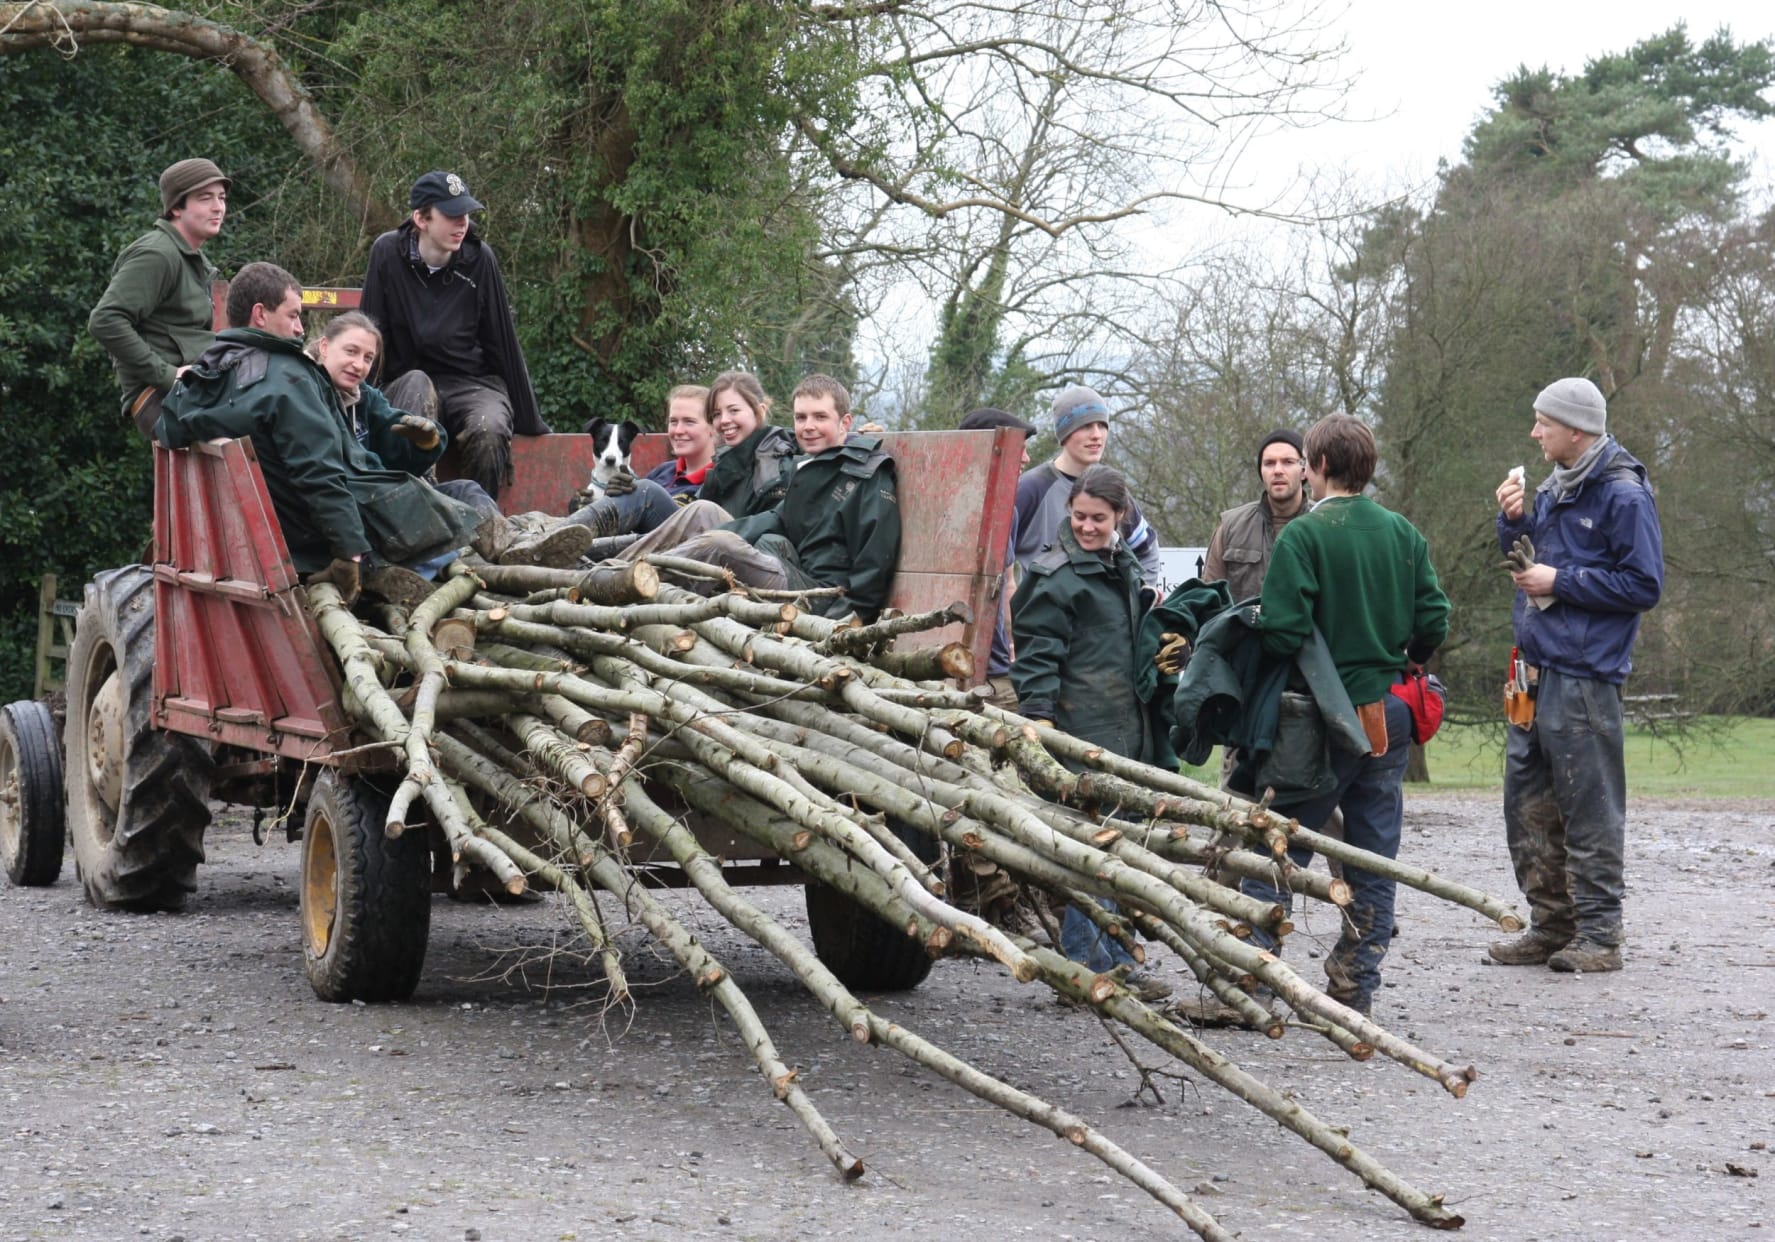 An image of students on a volunteer weekend at Great Dixter